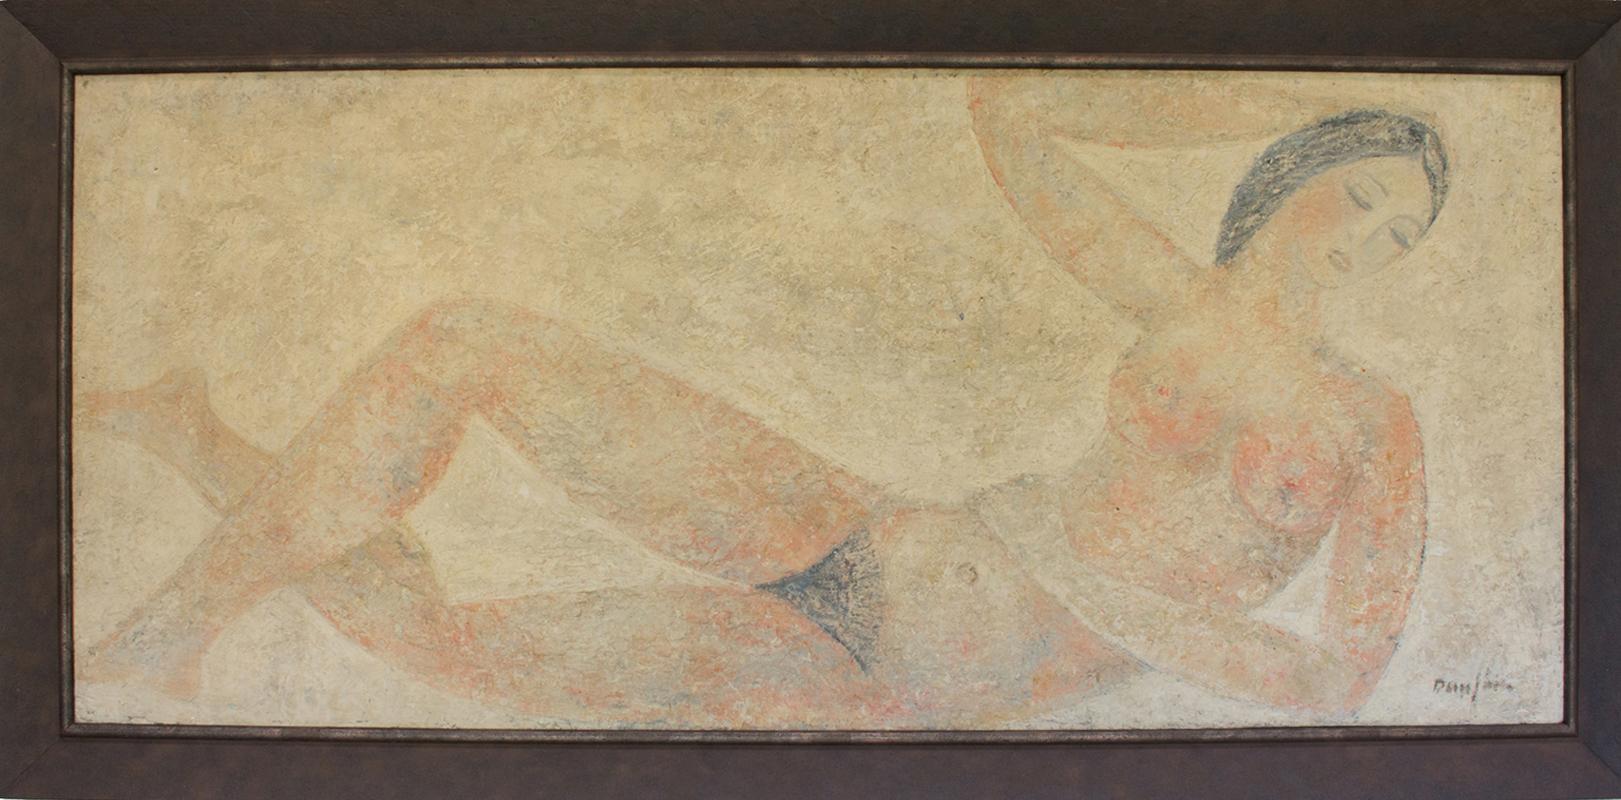 Raymond Dauphin (1910 - 1985), 20th Century French artist.
Mixed media on board painting, signed bottom right corner "Dauphin". Modernist composition with a lot of texture in the material, a mix of plaster with paint used to create the nude model.